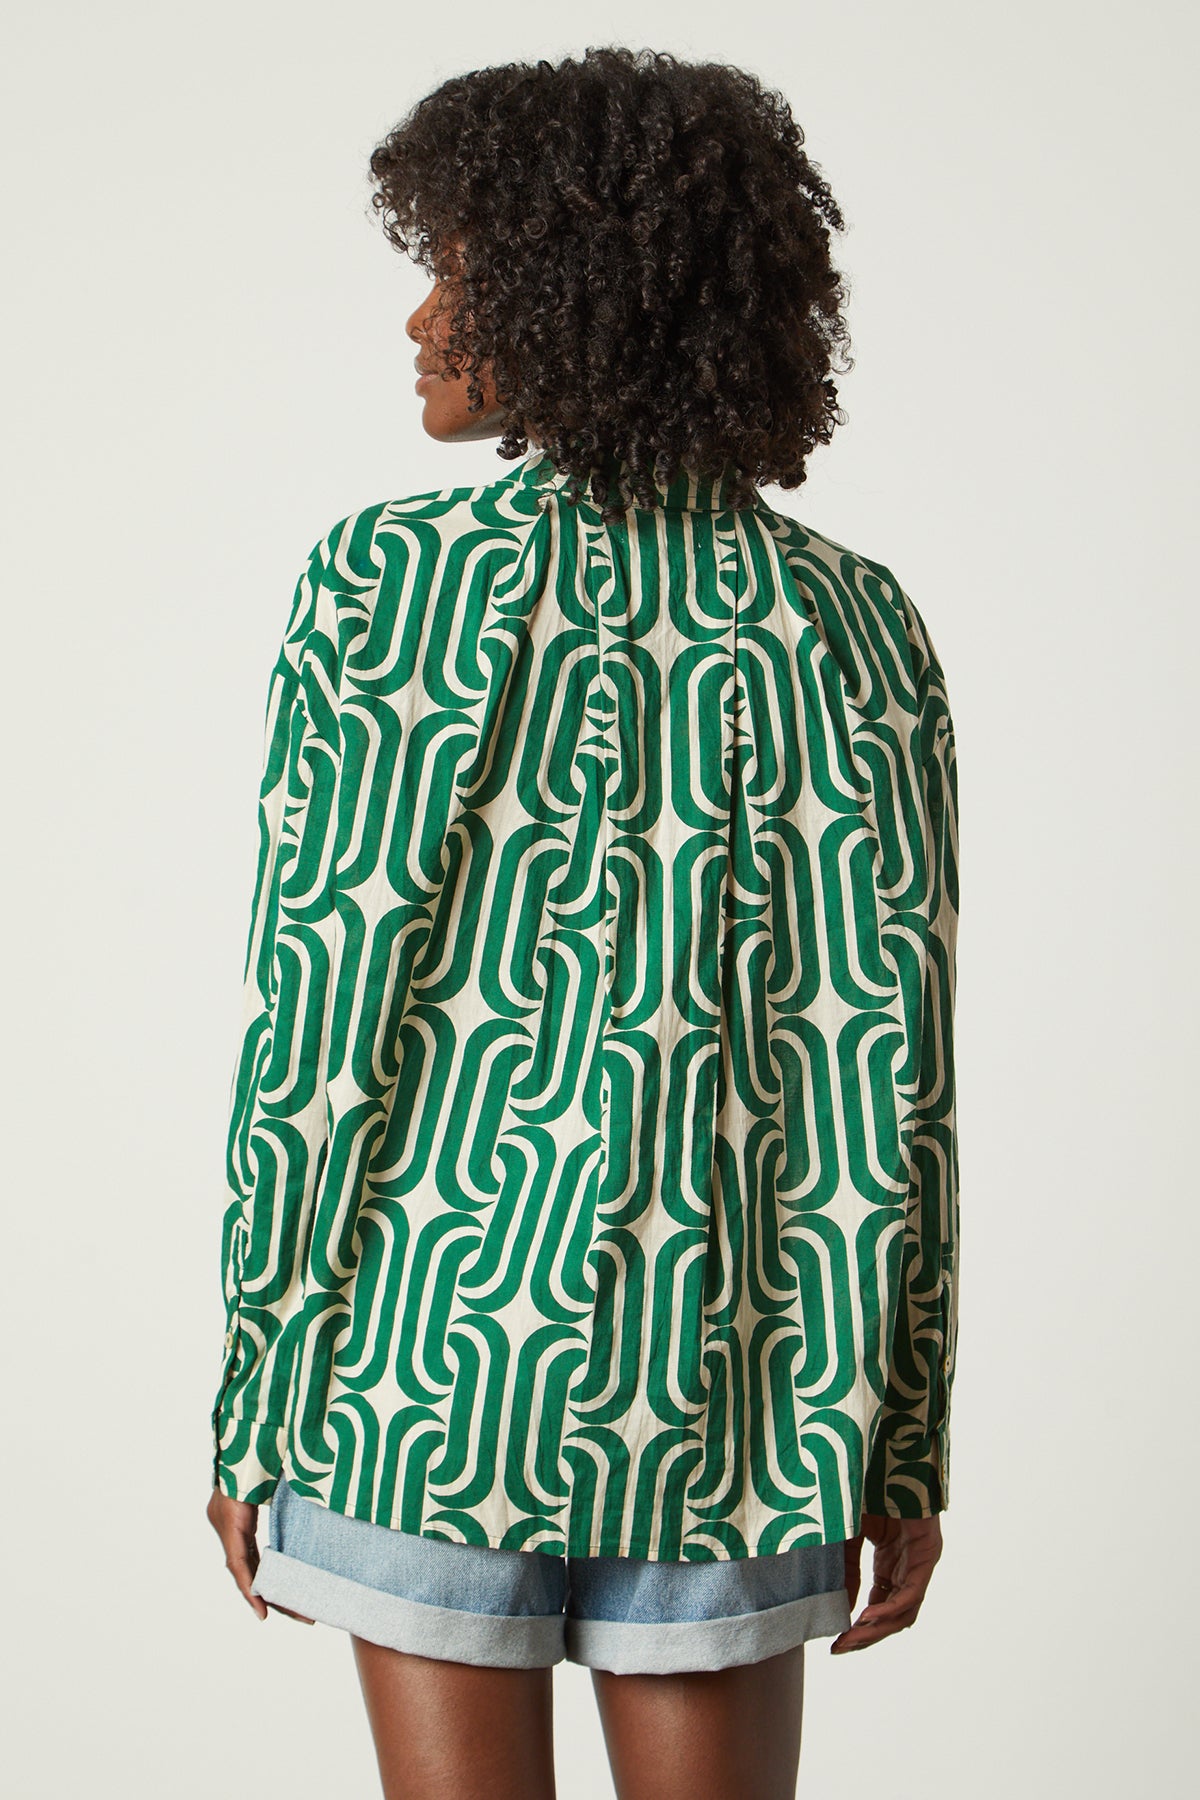 the back view of a woman wearing a Velvet by Graham & Spencer ANNALISE PRINTED TOP shirt.-26142518476993